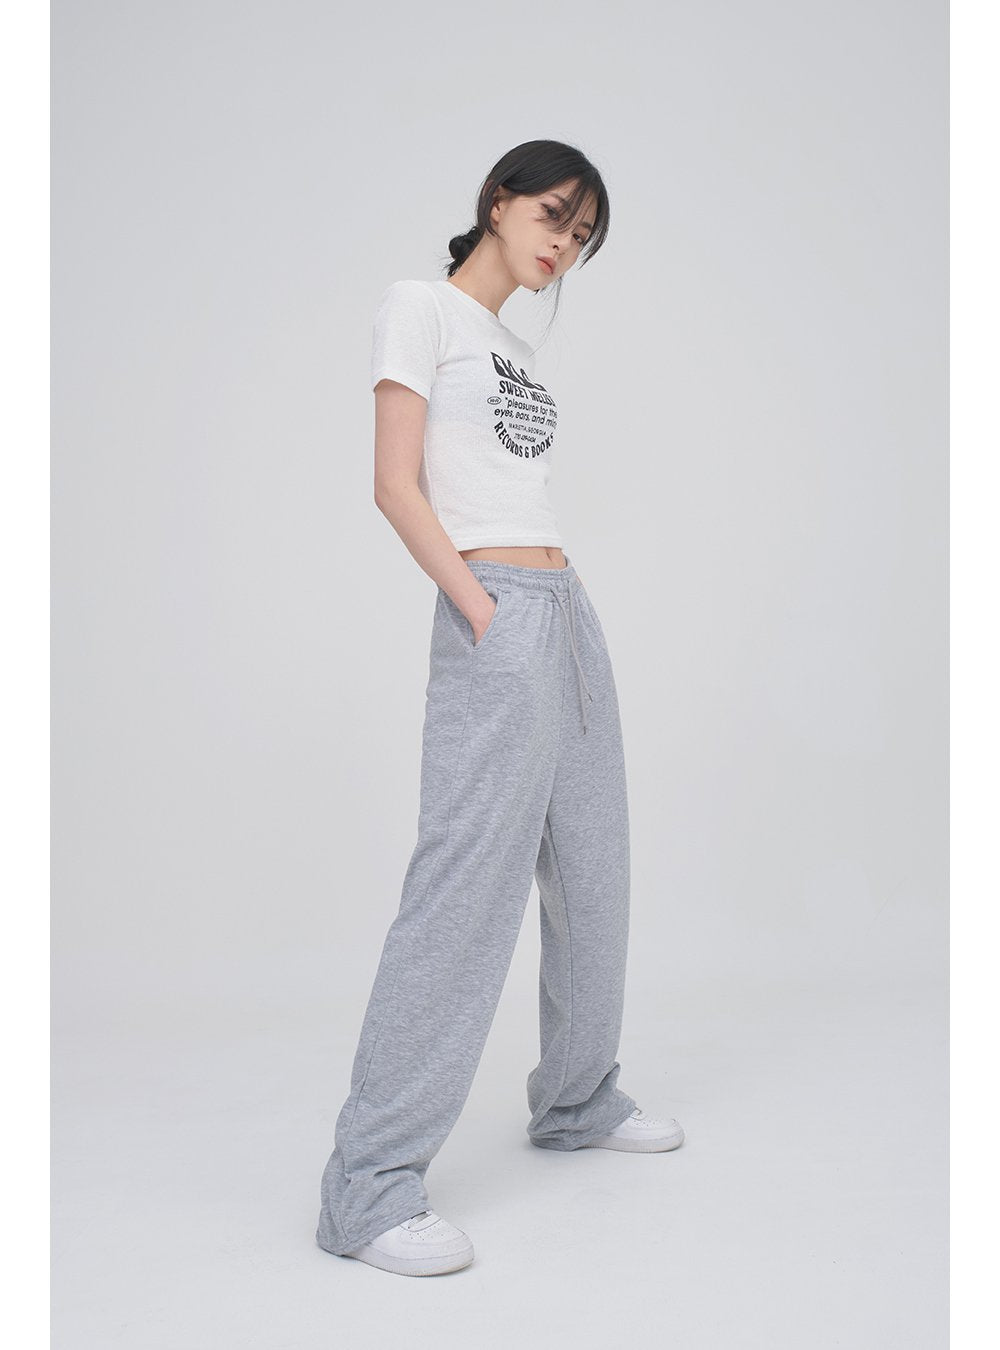 Women Fitted Track Pants with Contrast Taping